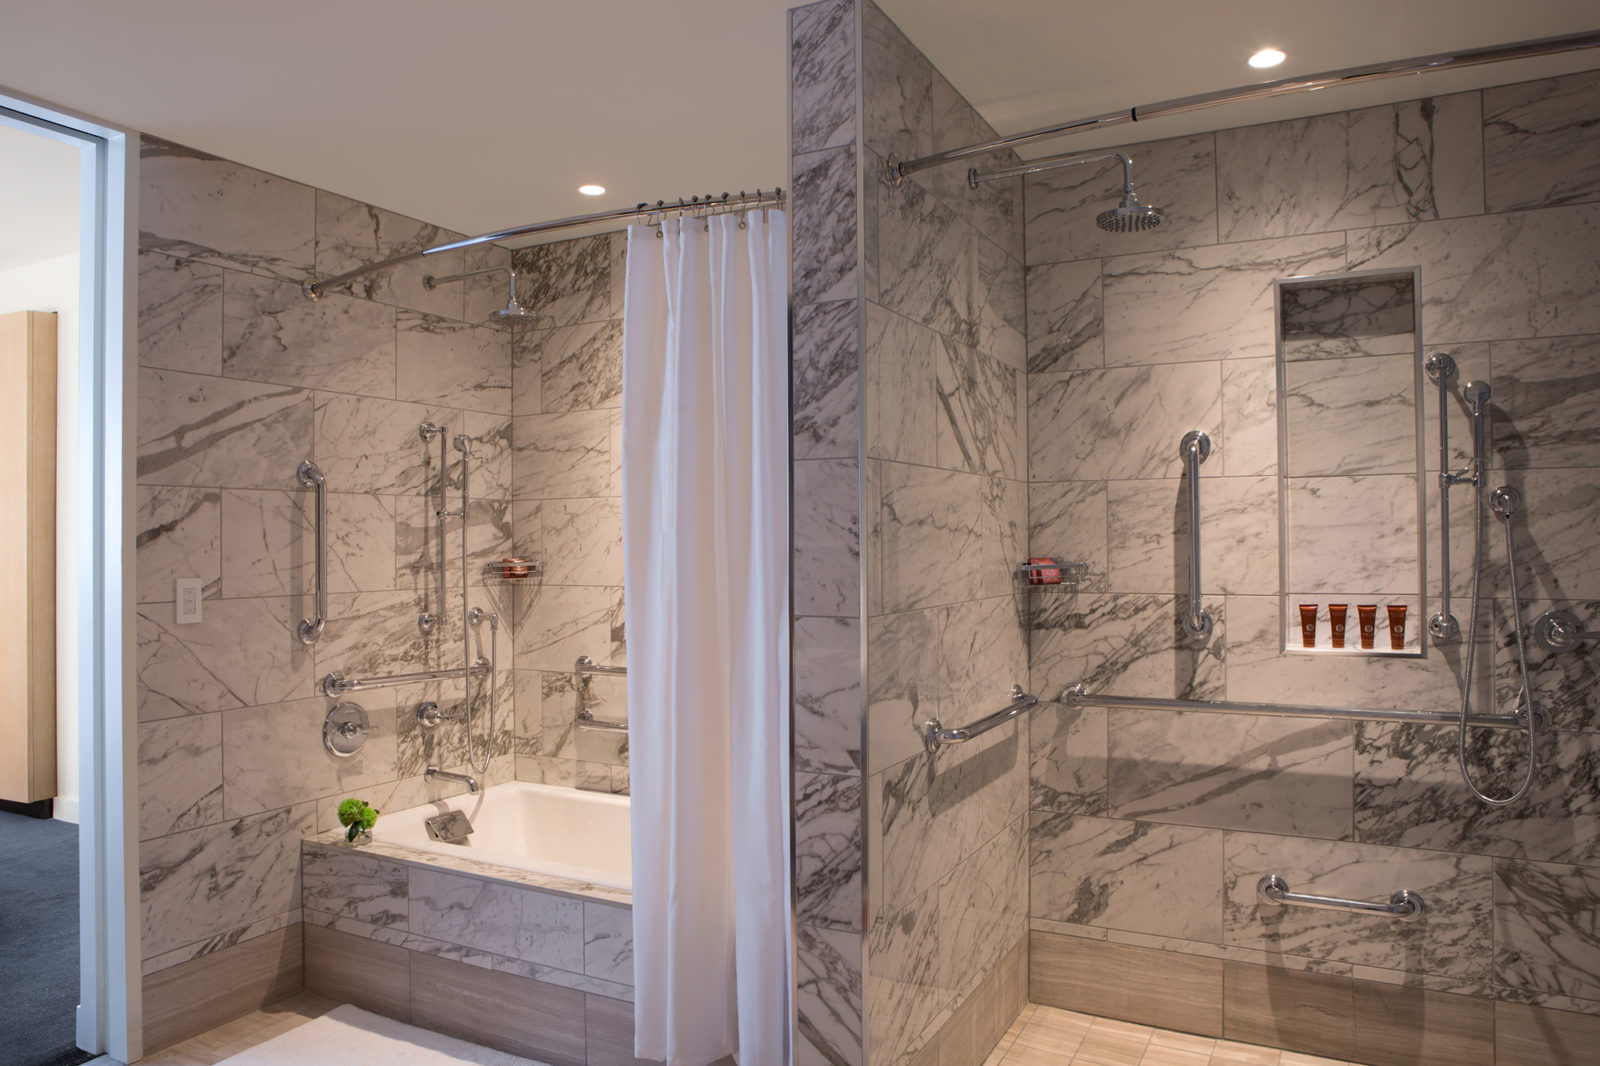 Luxury bathroom with marble walls and soft robes